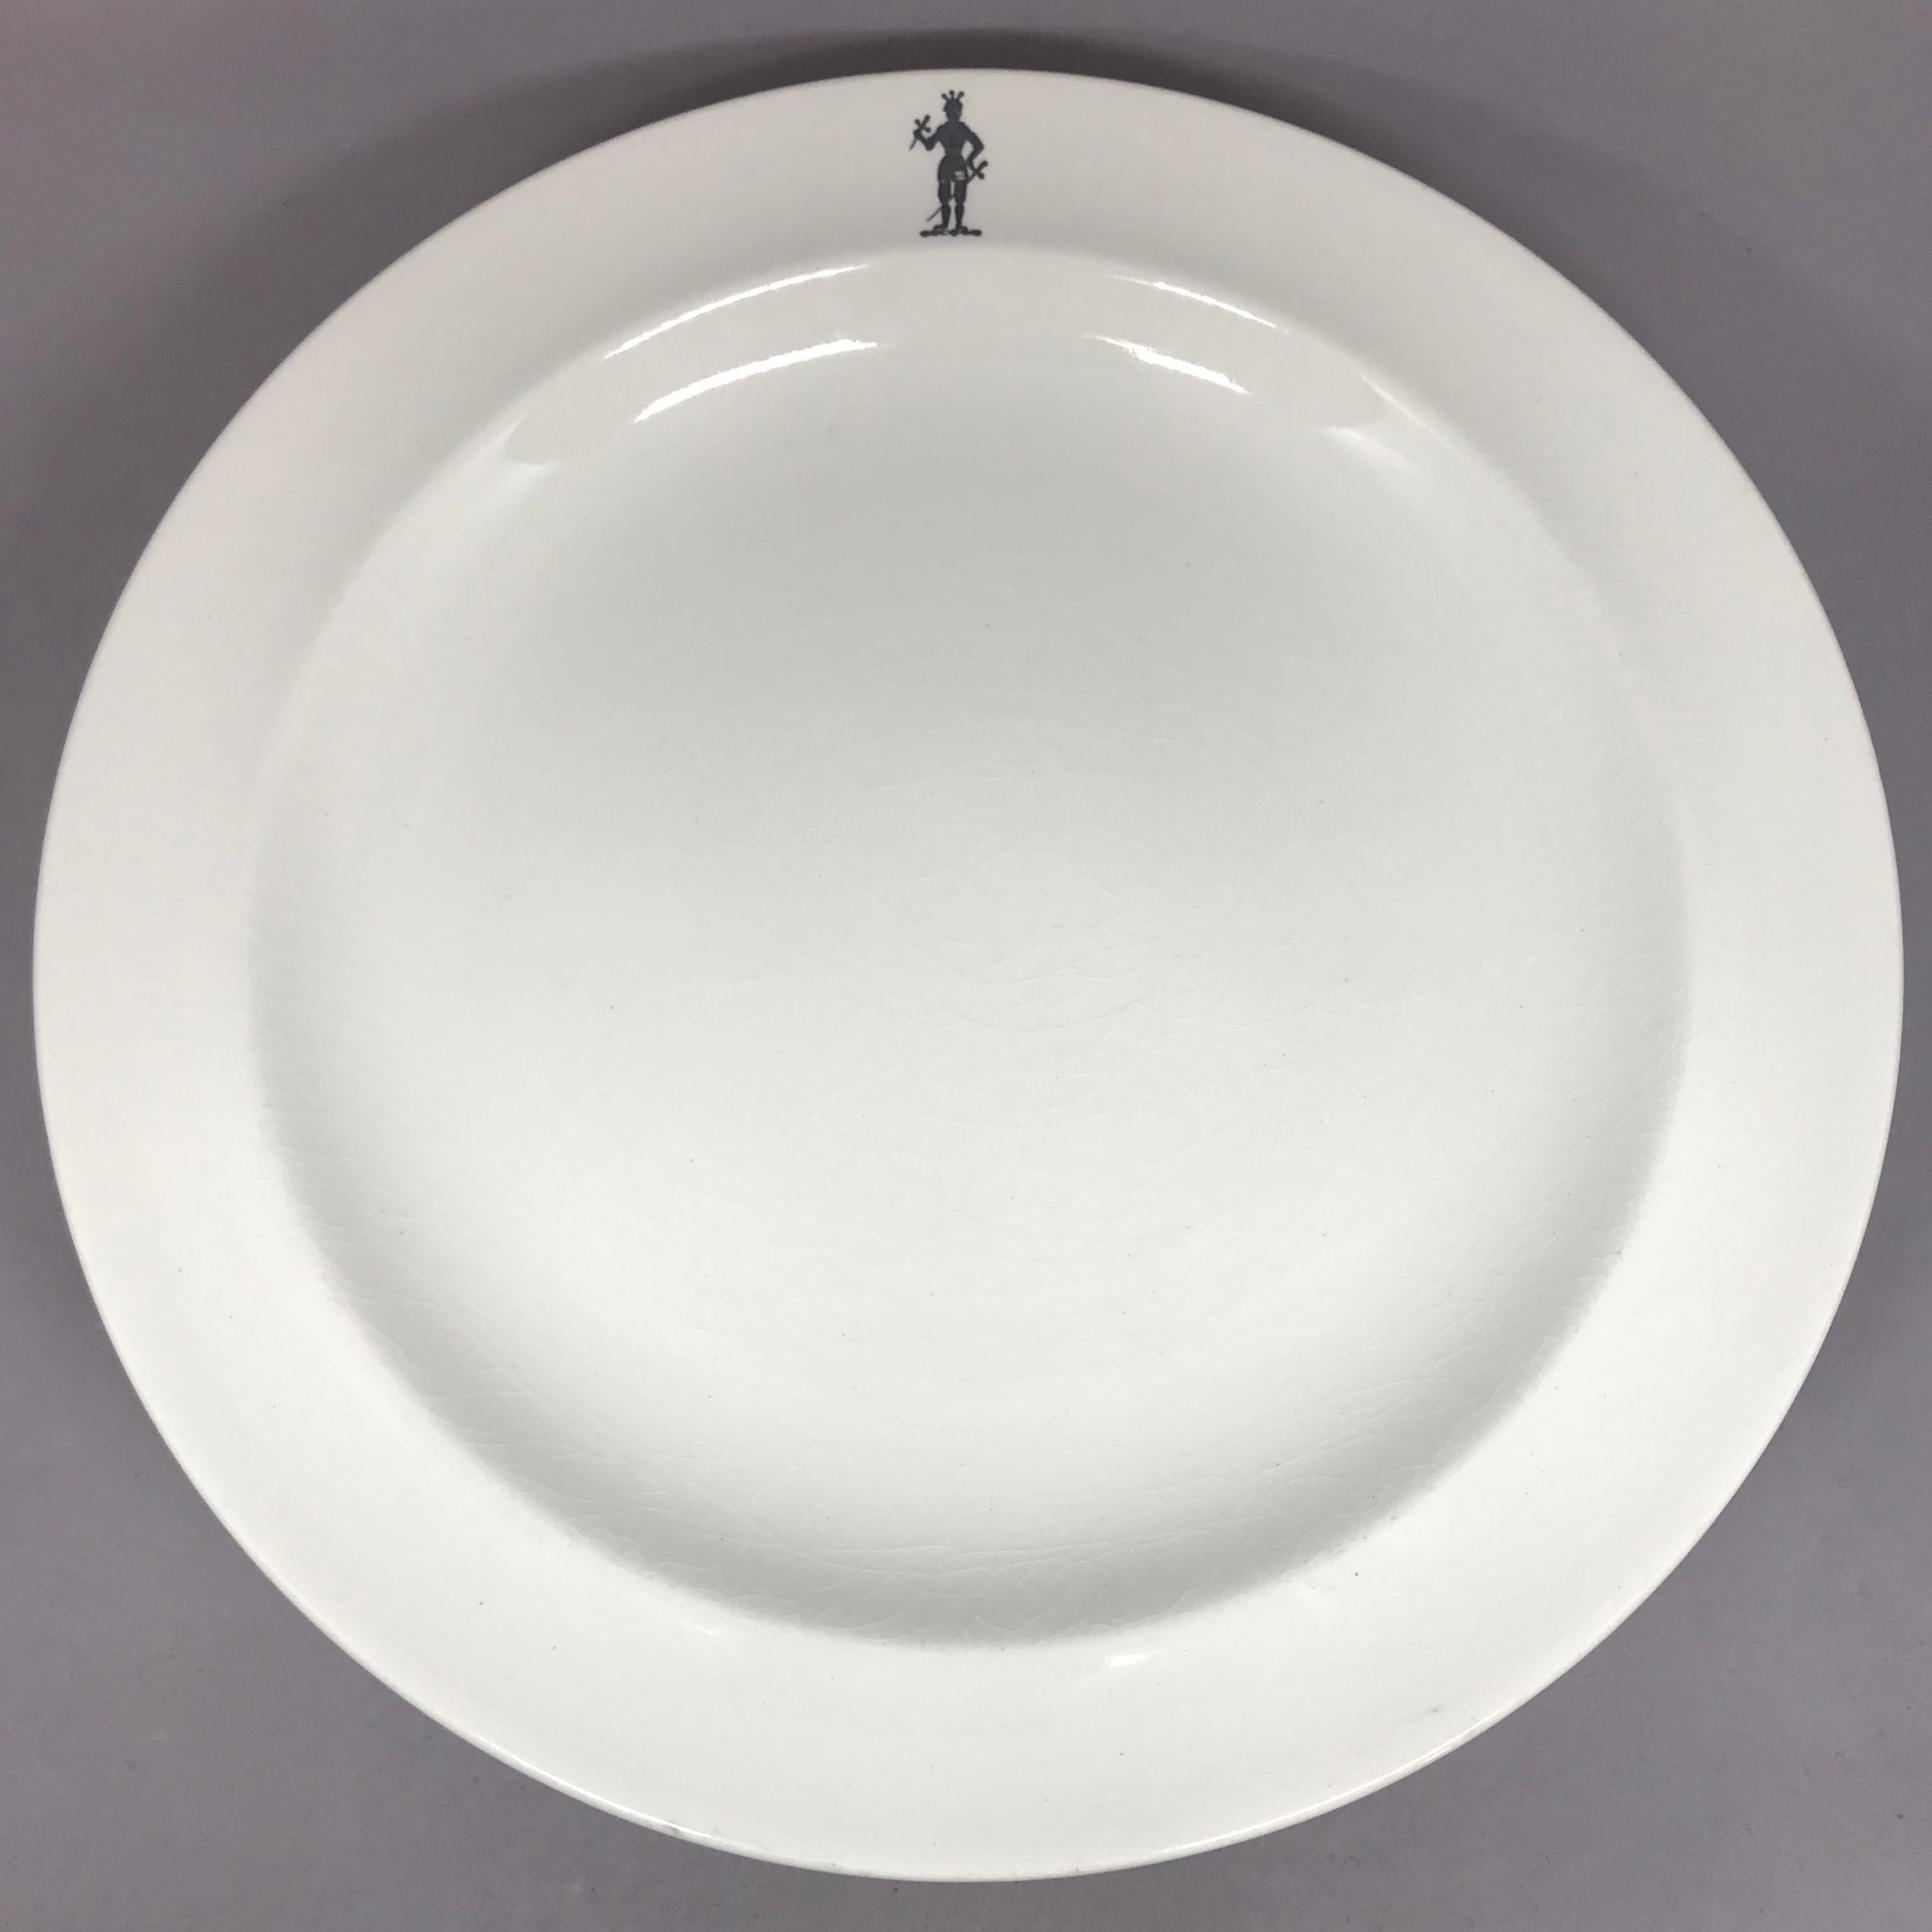 Set of Ten Wedgwood creamware knight motif plates. Ten vintage white/ivory creamware dishes with a hand painted knight in full armor; each night varying in shade from dark black to grey/camel. Impressed marks for Wedgwood, 
England, circa